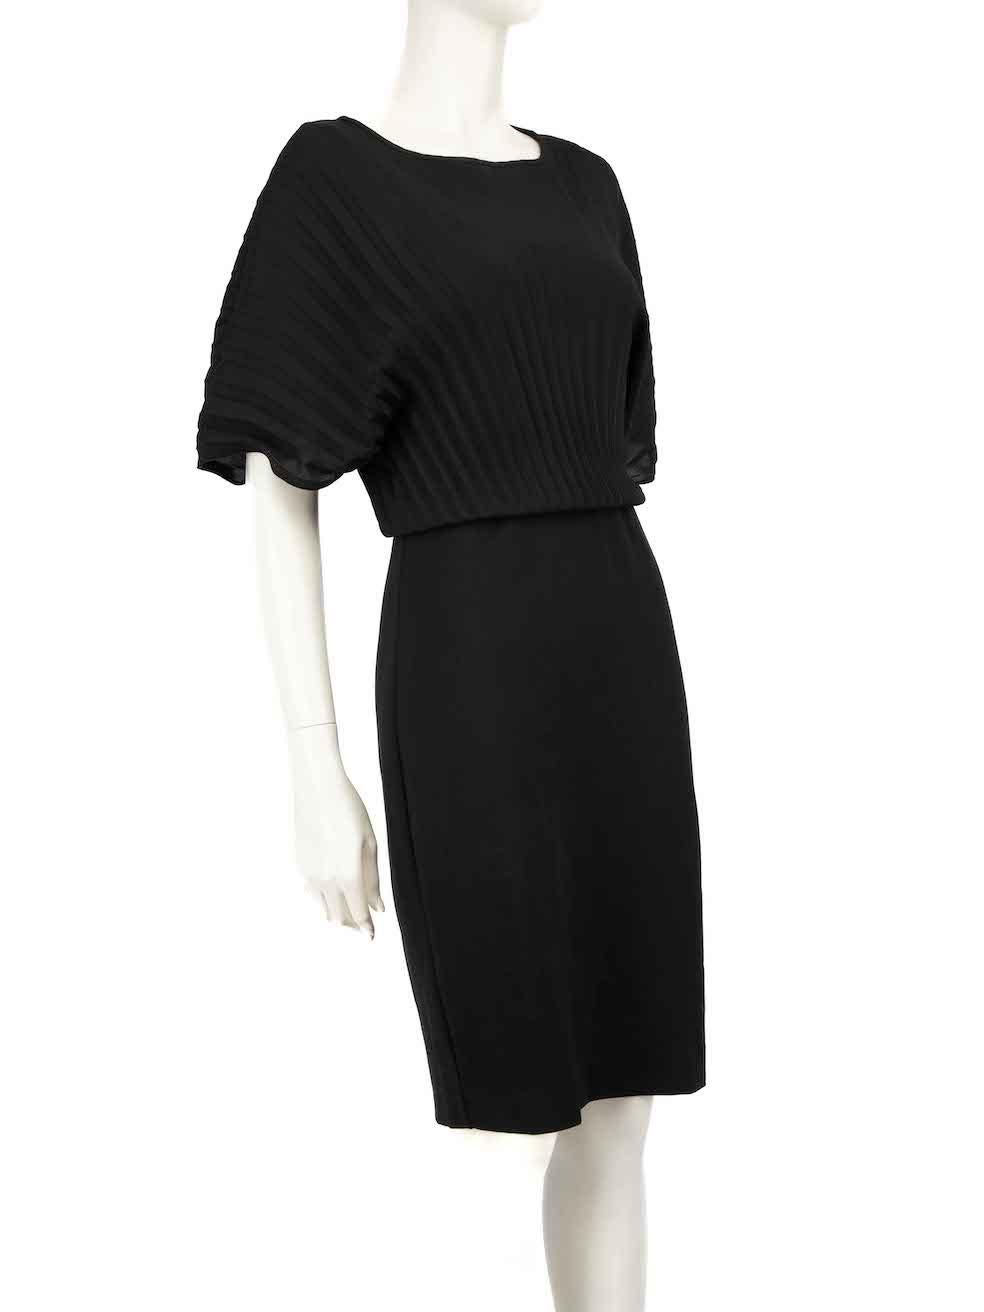 CONDITION is Very good. Minimal wear to dress is evident. Minimal wear to the bottom of the dress is seen with abrasion marks on this used Max Mara designer resale item.
 
 
 
 Details
 
 
 Black
 
 Viscose
 
 Dress
 
 Pleated top
 
 Short sleeves
